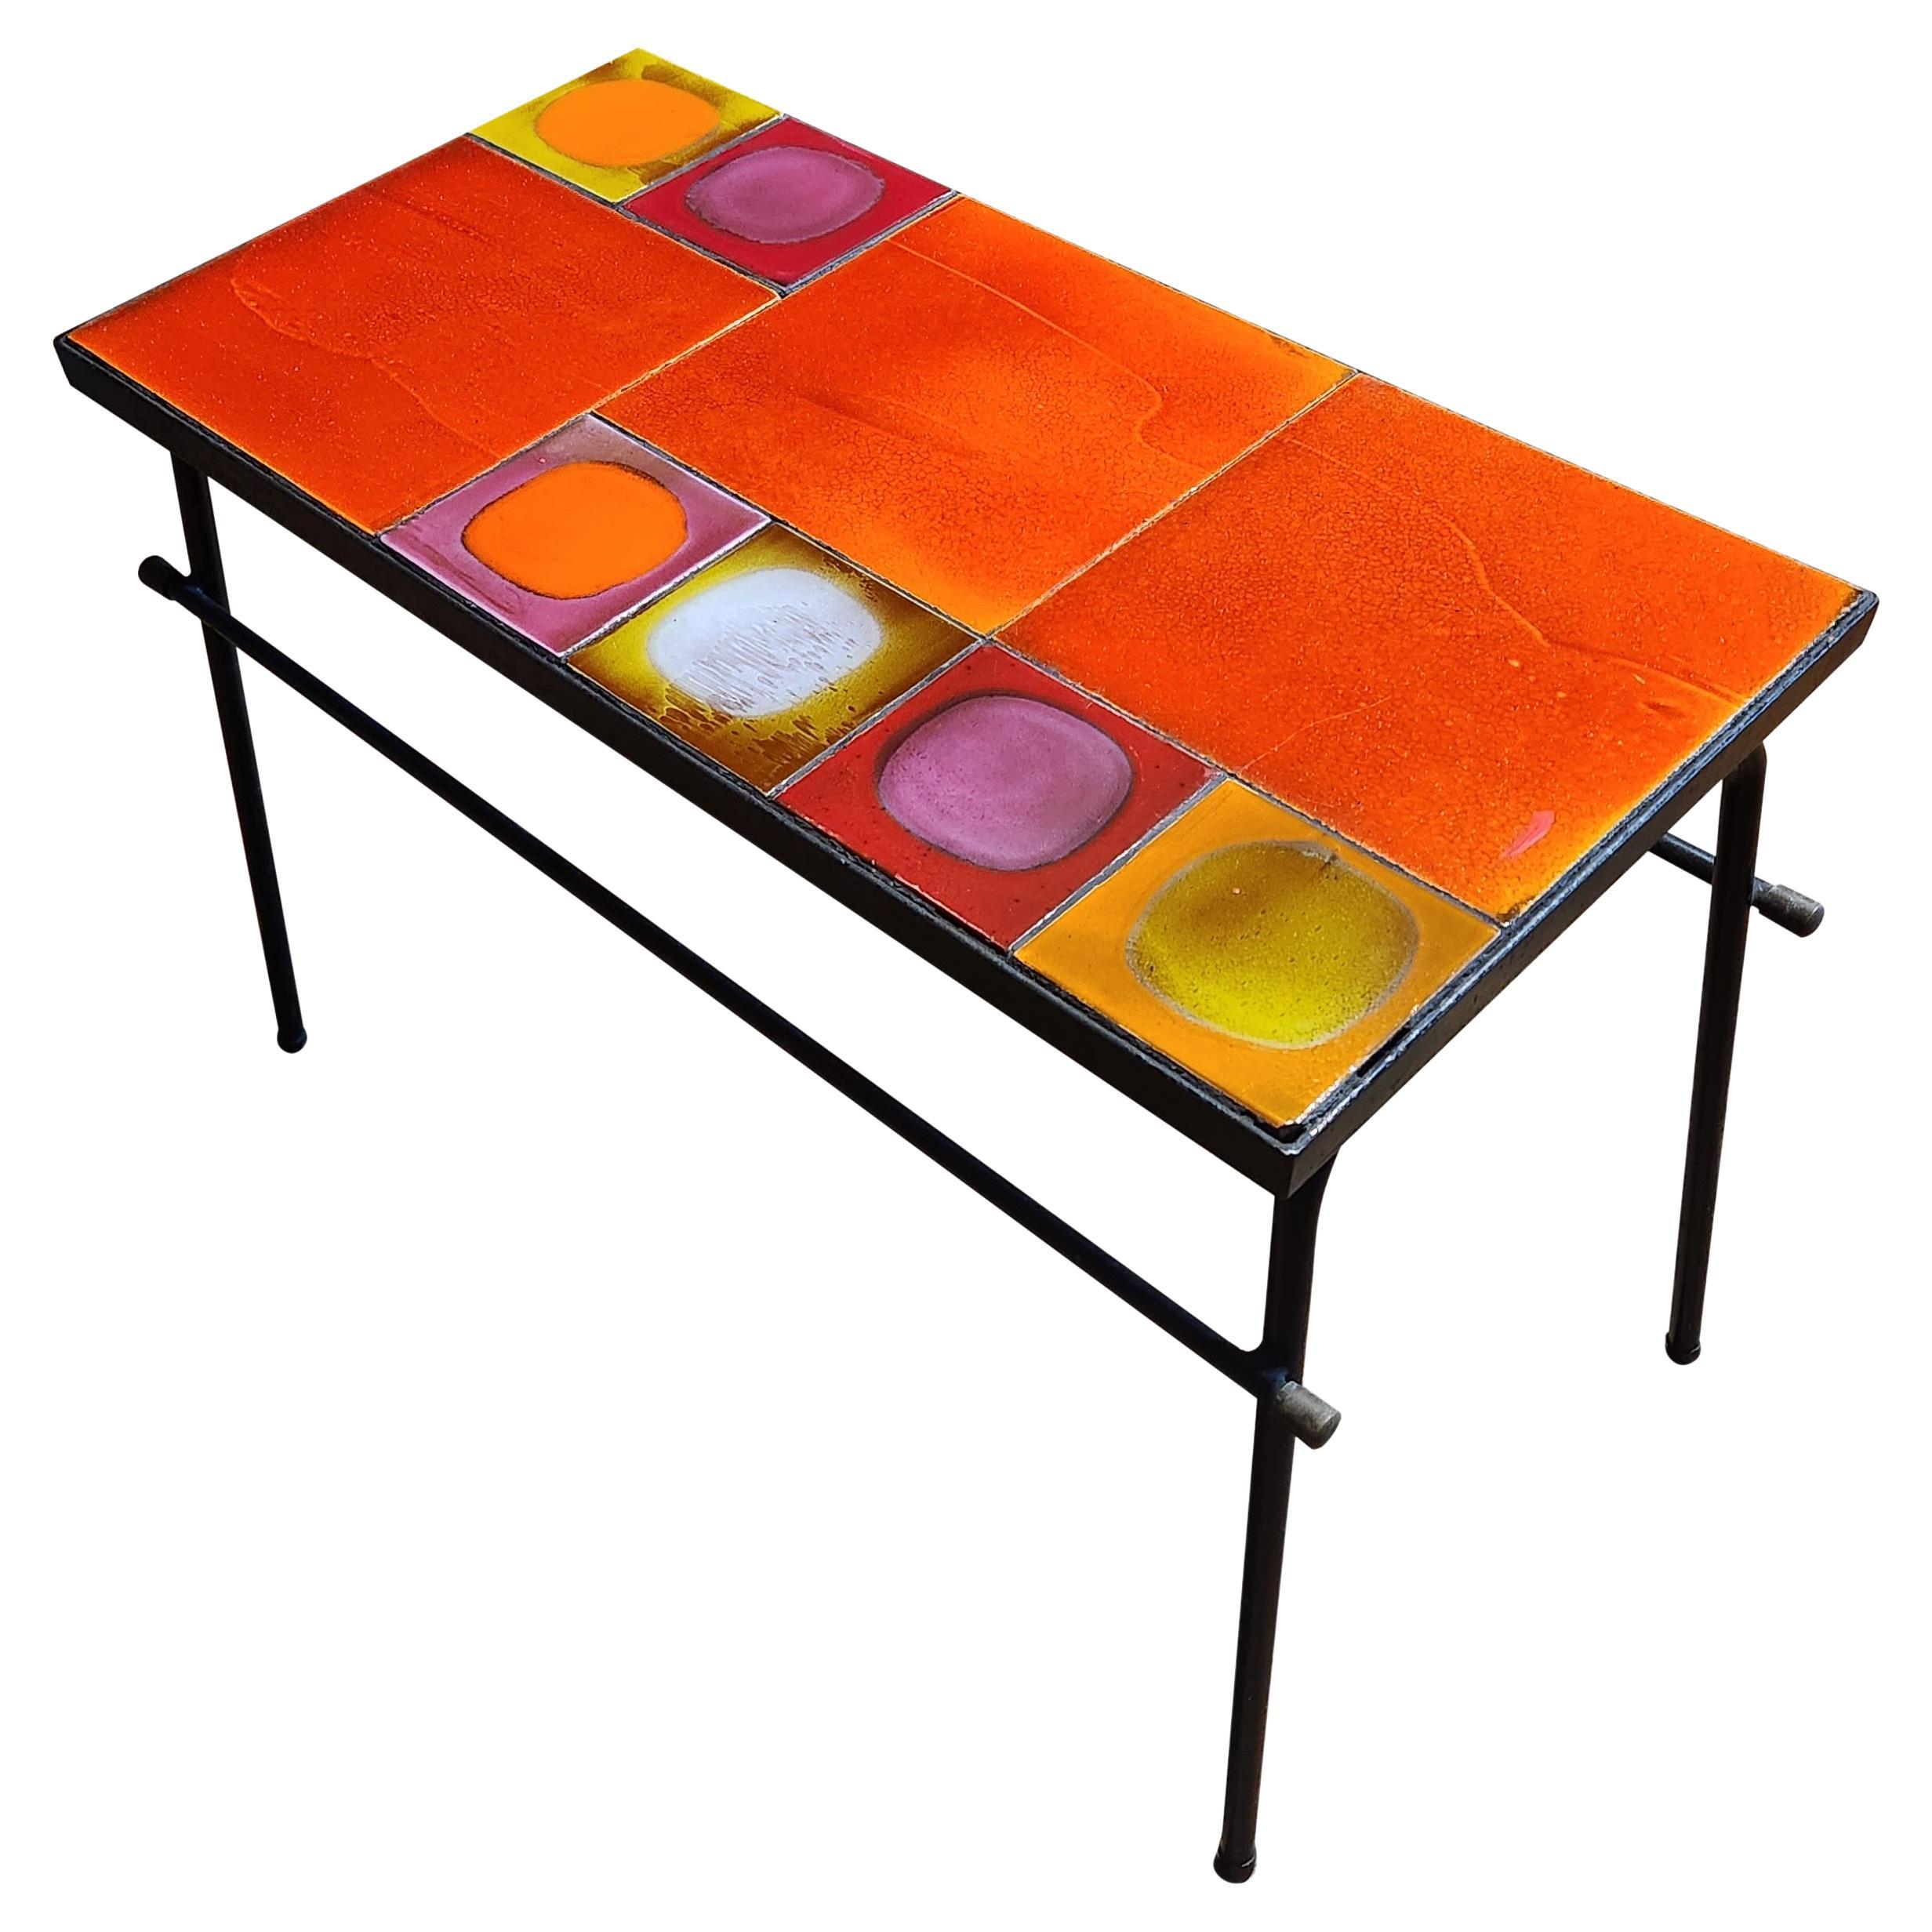 This coffee table is made with colorful ceramic tiles made in the 1970's by Roger Capron, one of the most well-known ceramist of the Modern era.  The smaller tiles are the 